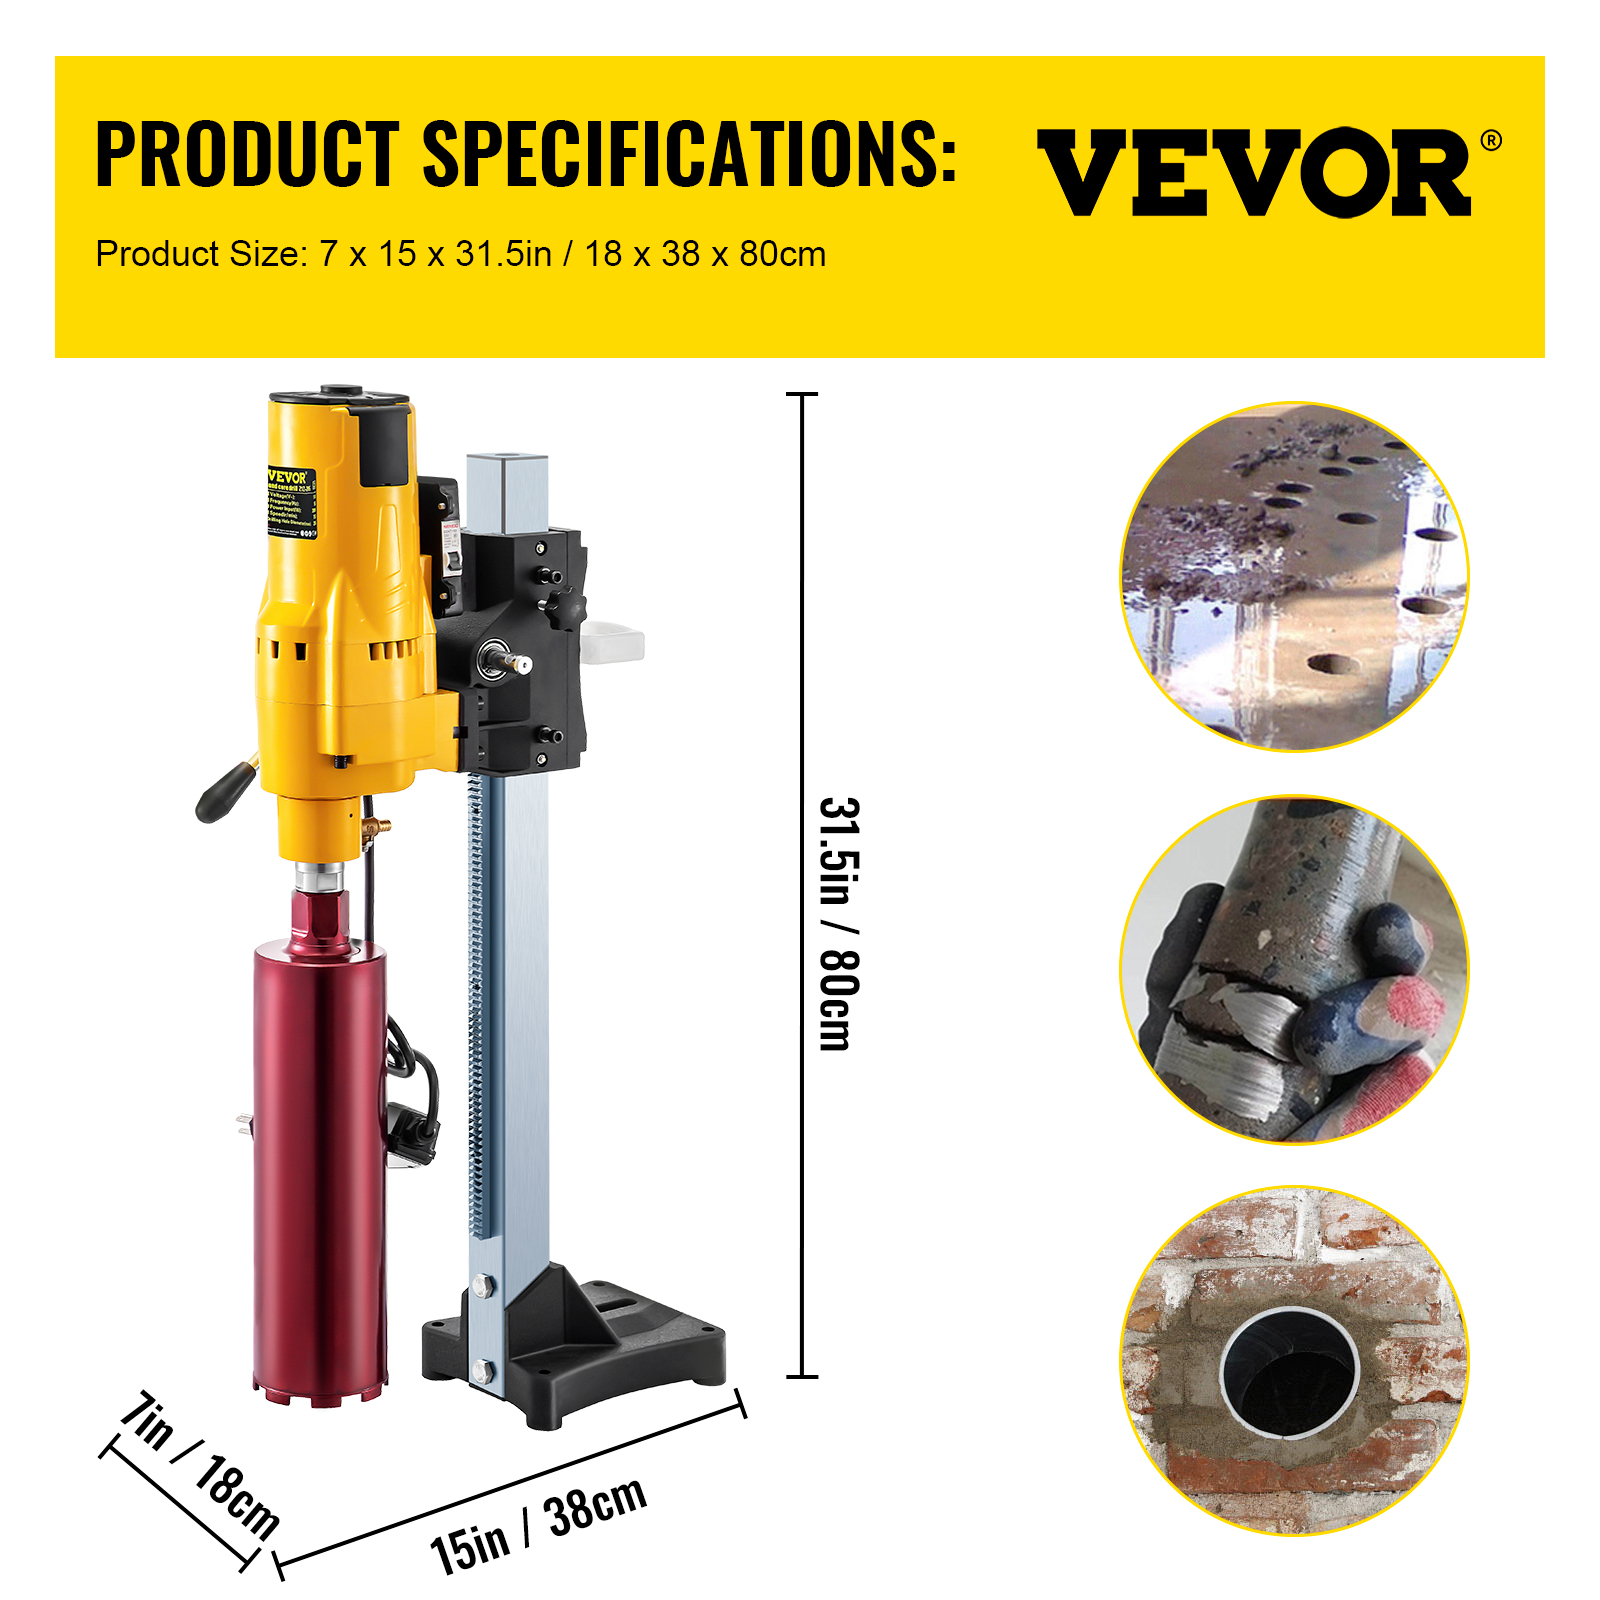 205Mm Diamond Core Drill Rig 3980W Wet Dry Handheld Concrete Drilling Machine Kit W/ Bits and Spanner for Installing Pipes